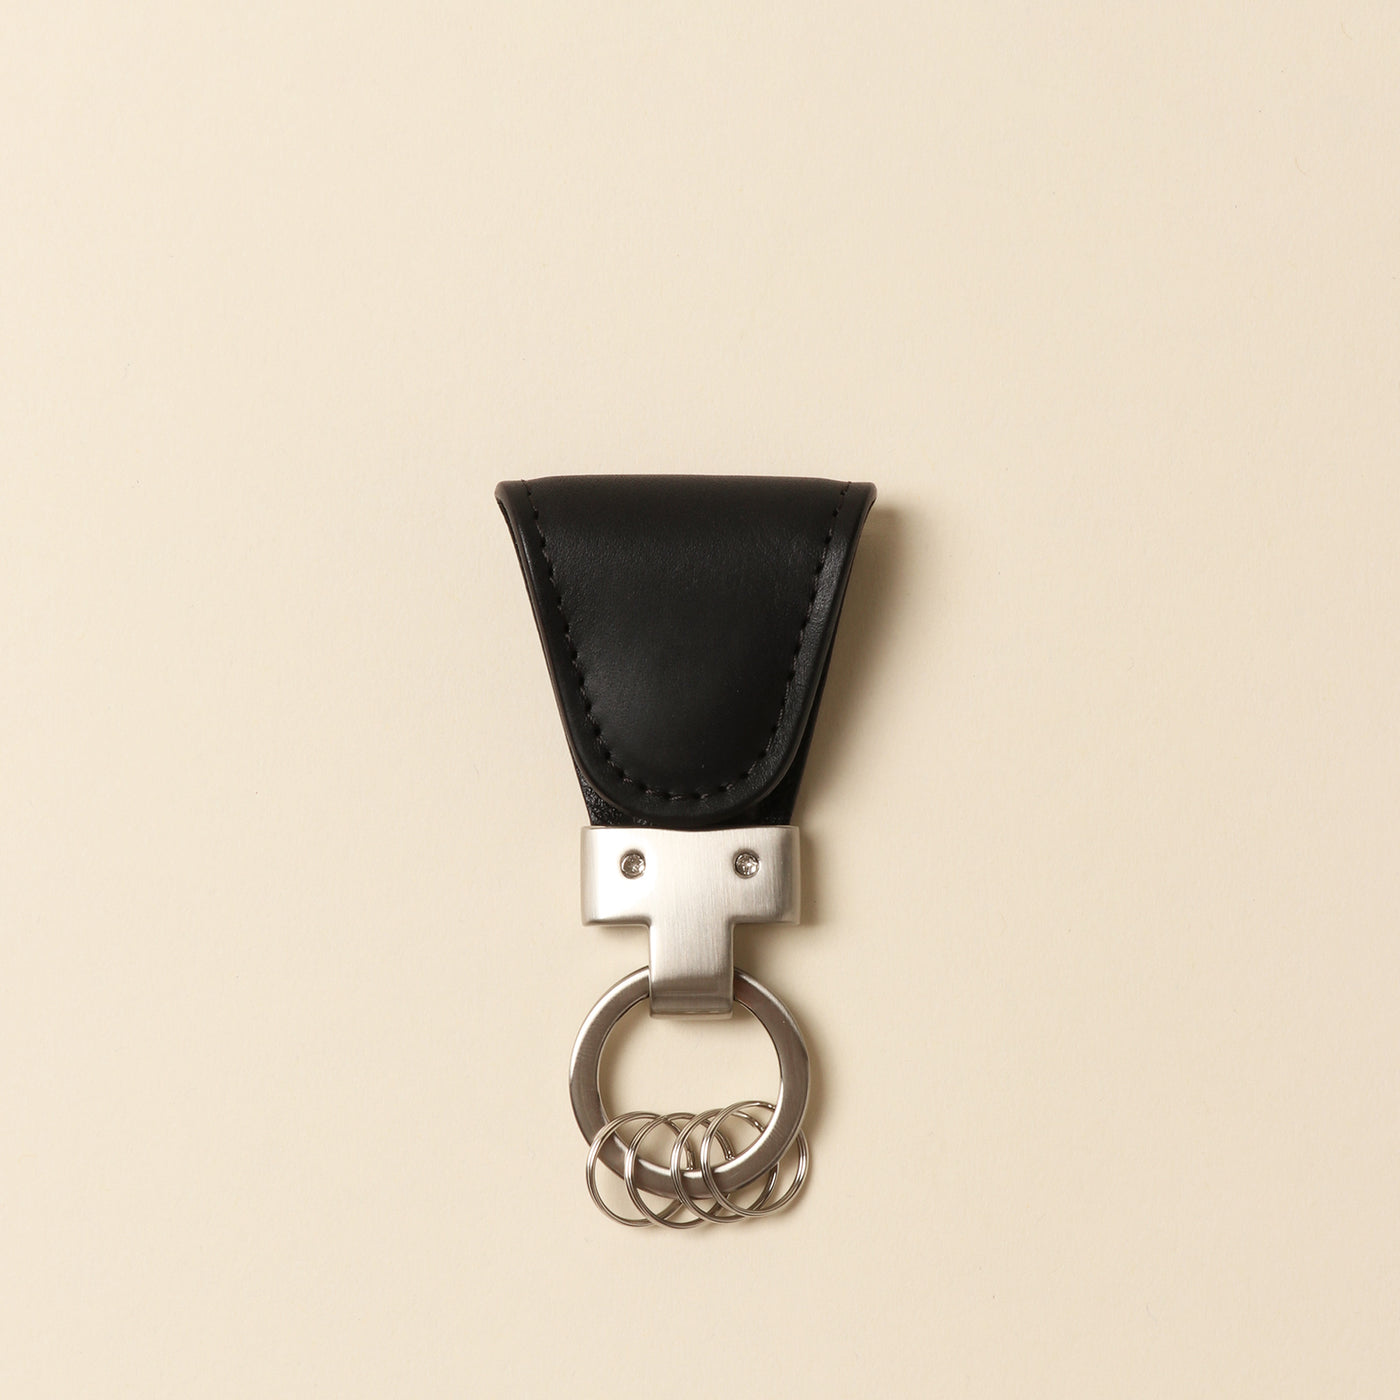 ＜VINTAGE REVIVAL PRODUCTIONS> Key clip oiled leather, blue